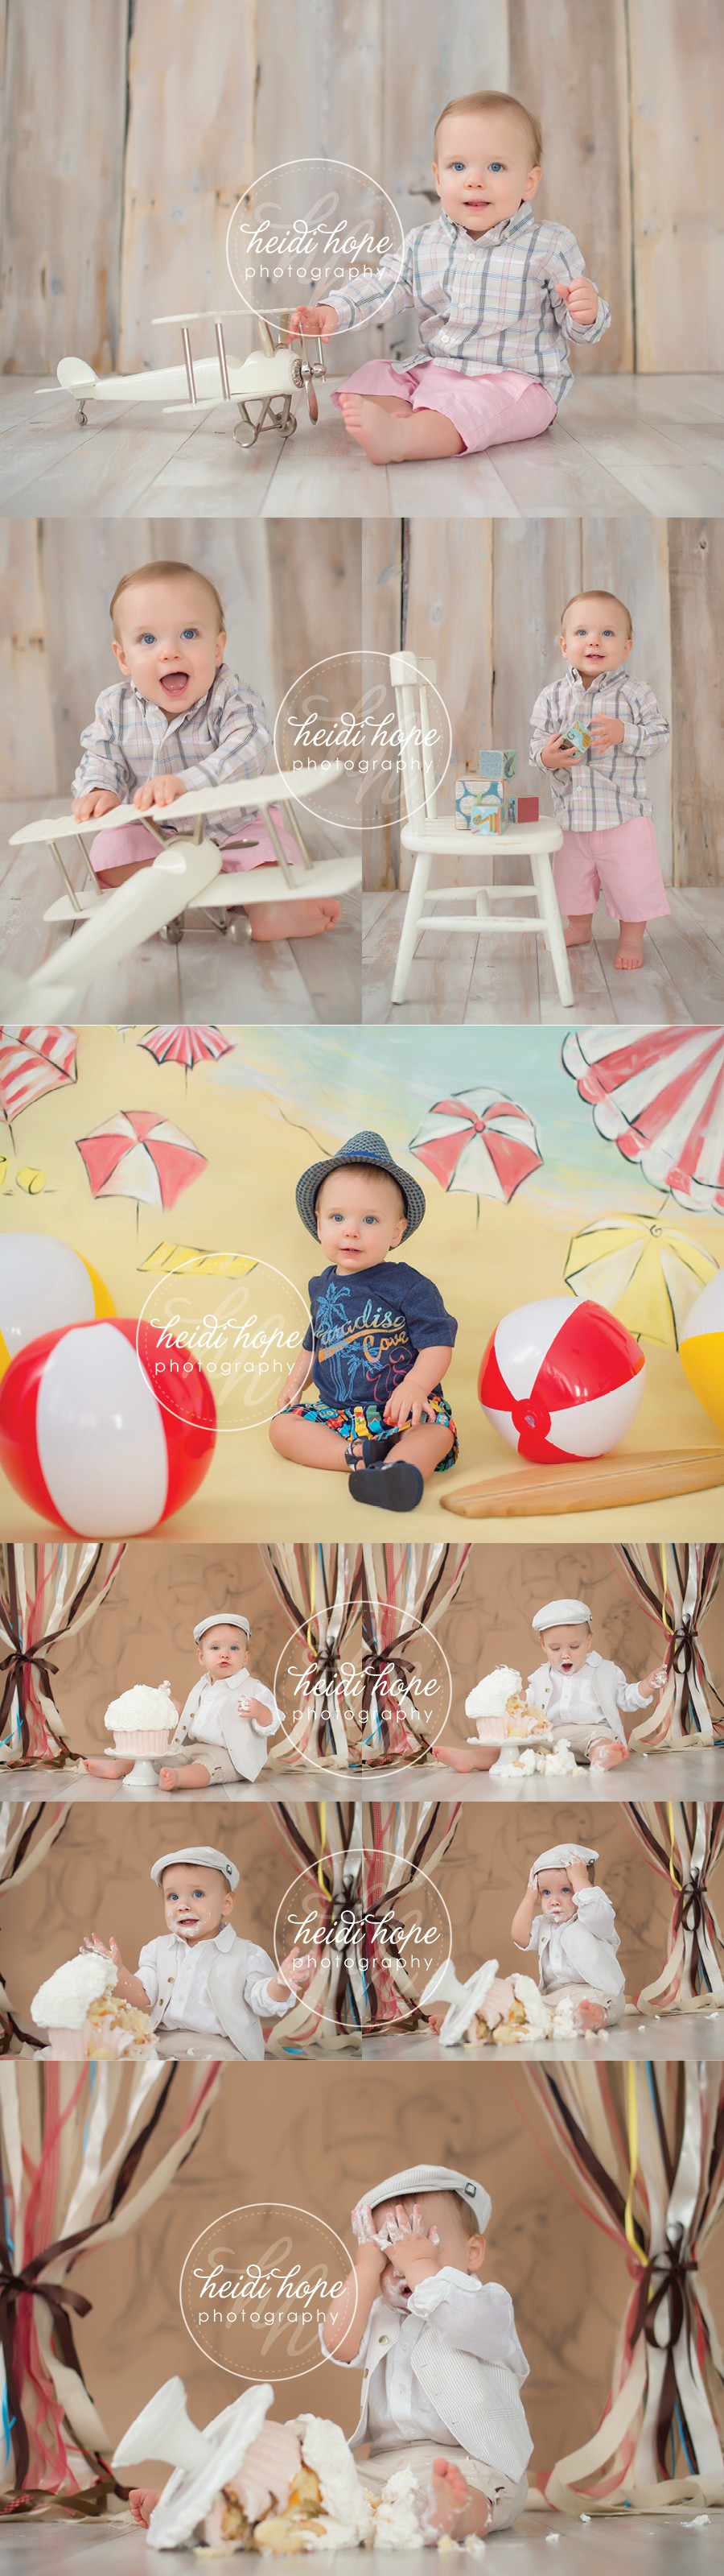 Baby N’s First Birthday Carnival!